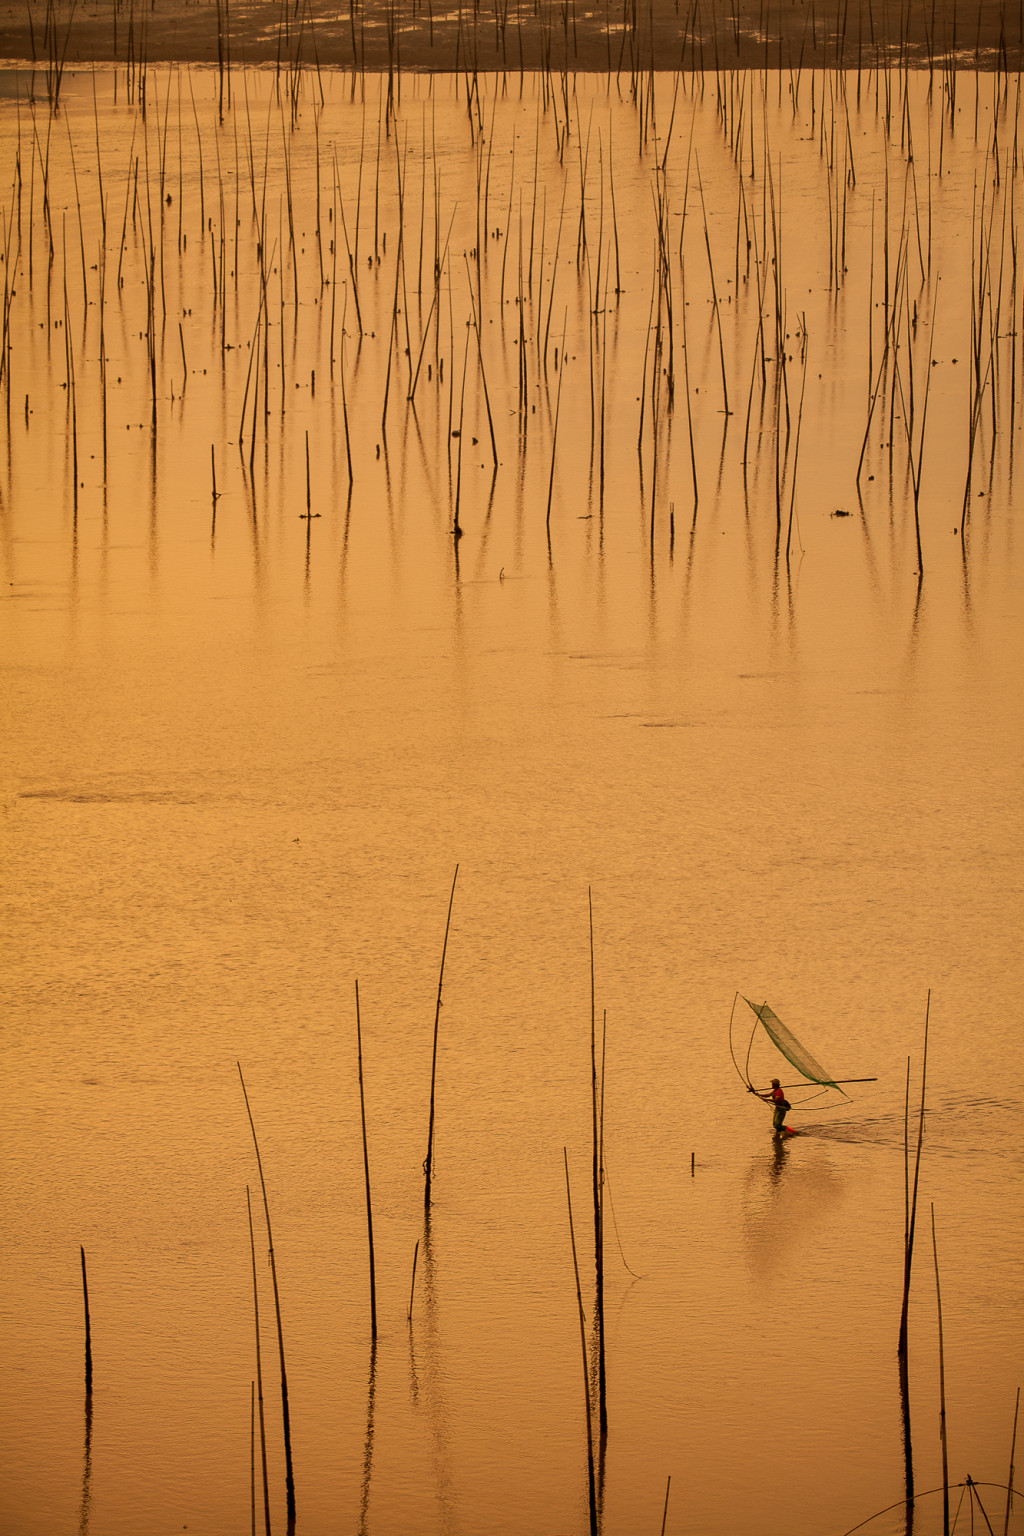 A lone fisherman carrying his net at Bei Qi at XiaPu, China. The golden reflection is of an incredible sunrise that appeared in the backgroun, just out of the picture.